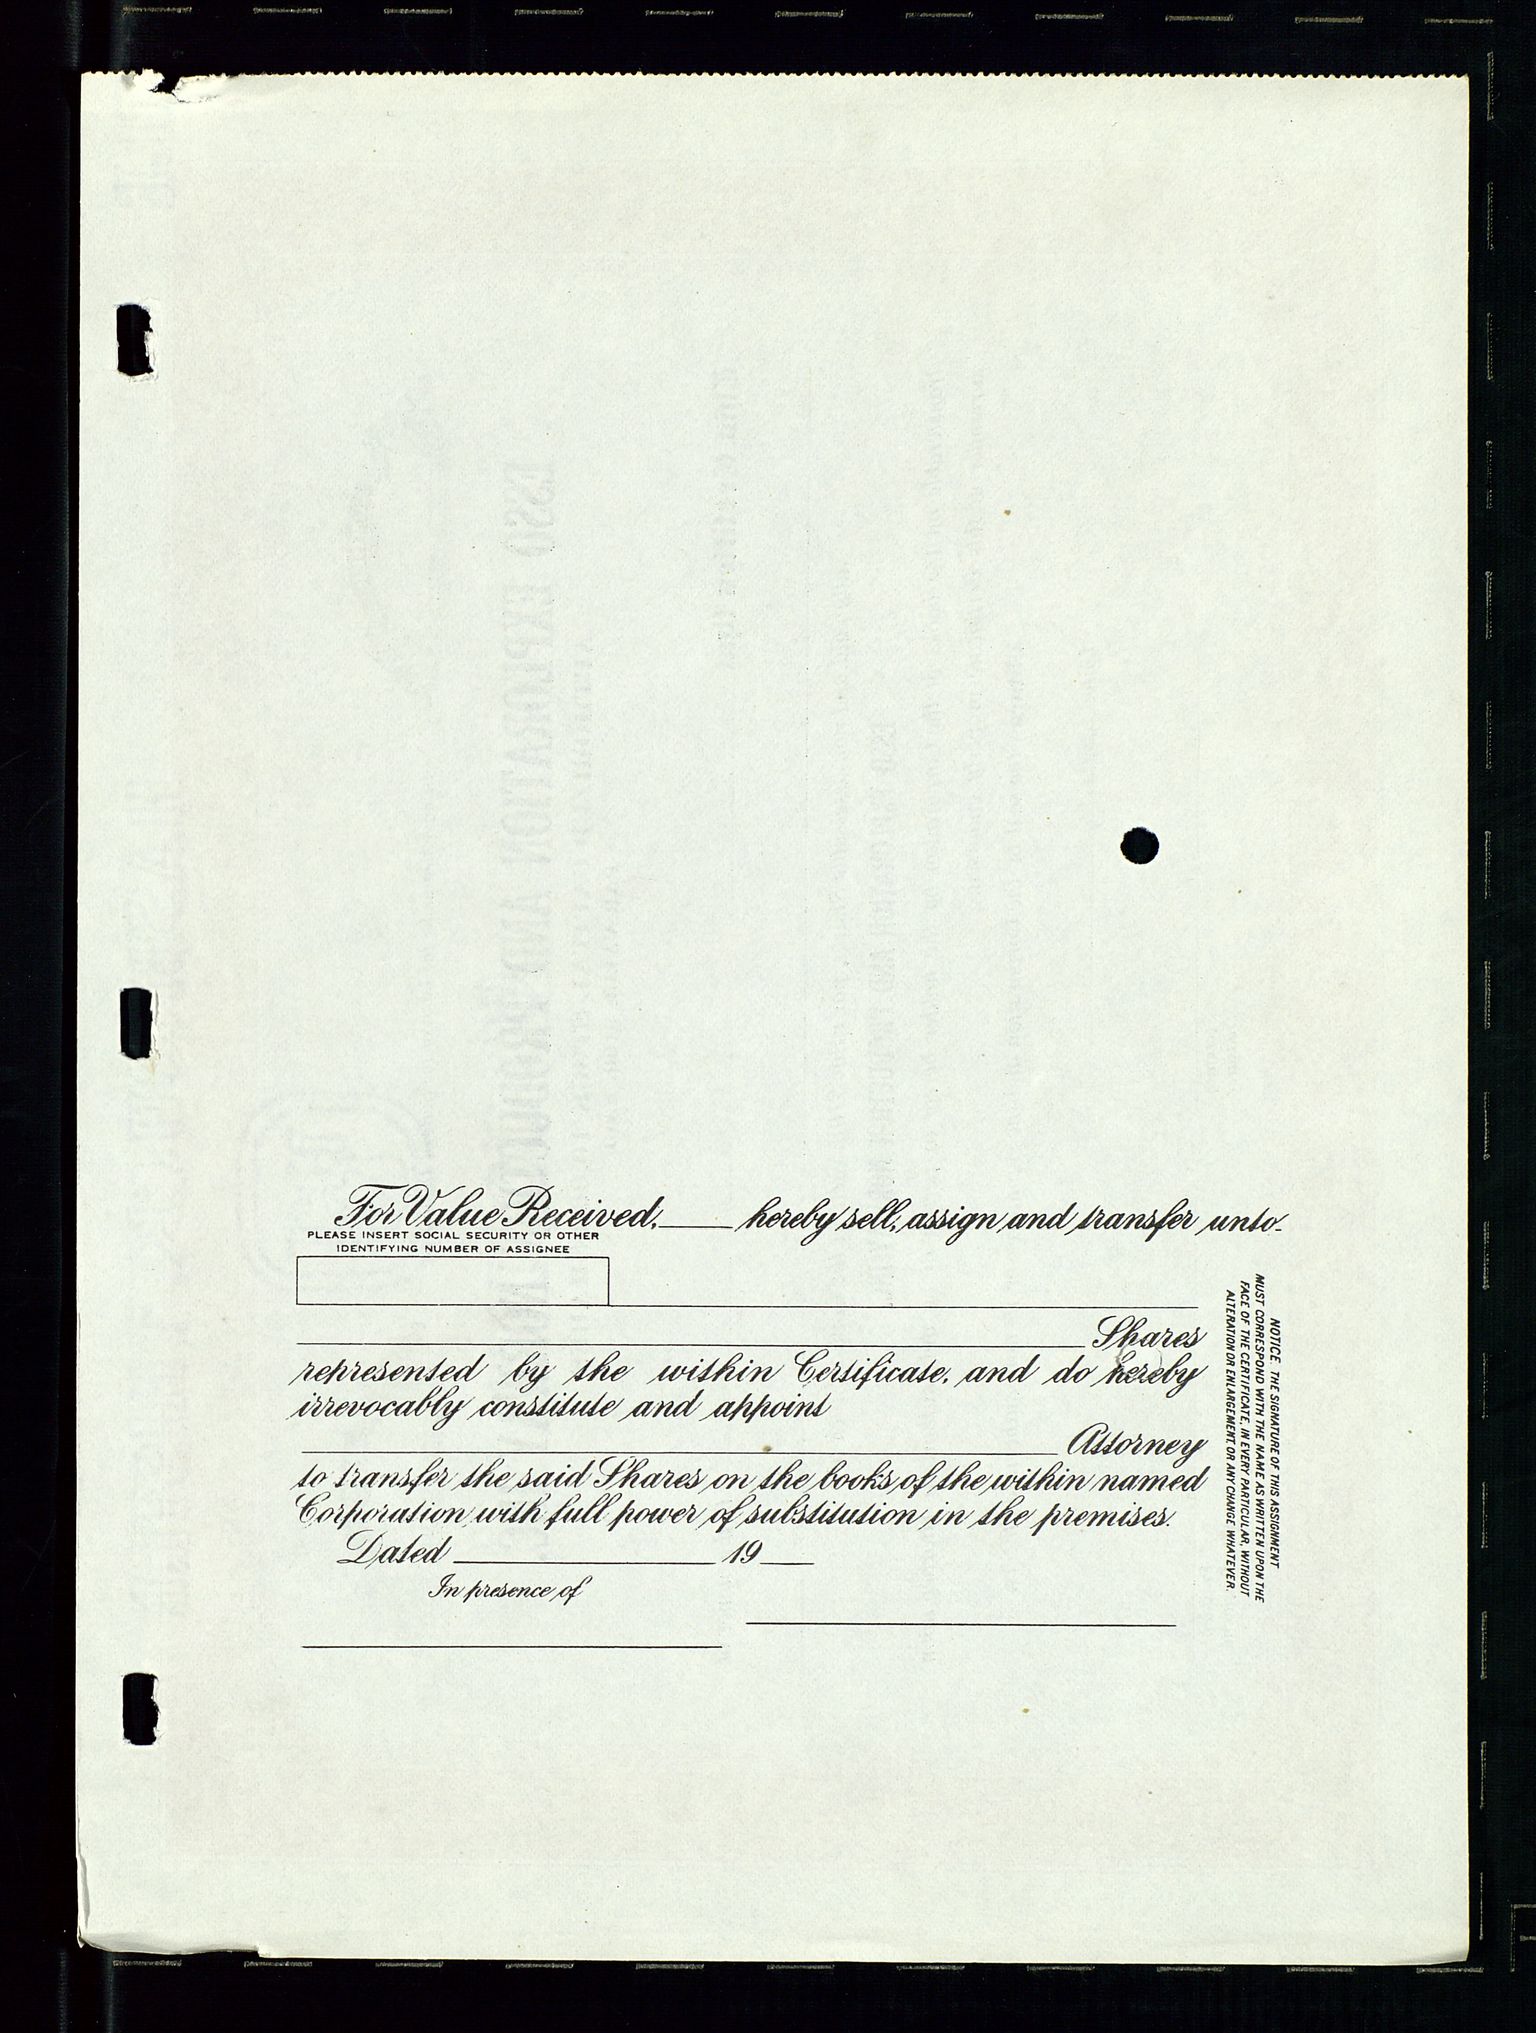 Pa 1512 - Esso Exploration and Production Norway Inc., SAST/A-101917/A/Aa/L0001/0002: Styredokumenter / Corporate records, Board meeting minutes, Agreements, Stocholder meetings, 1975-1979, s. 24